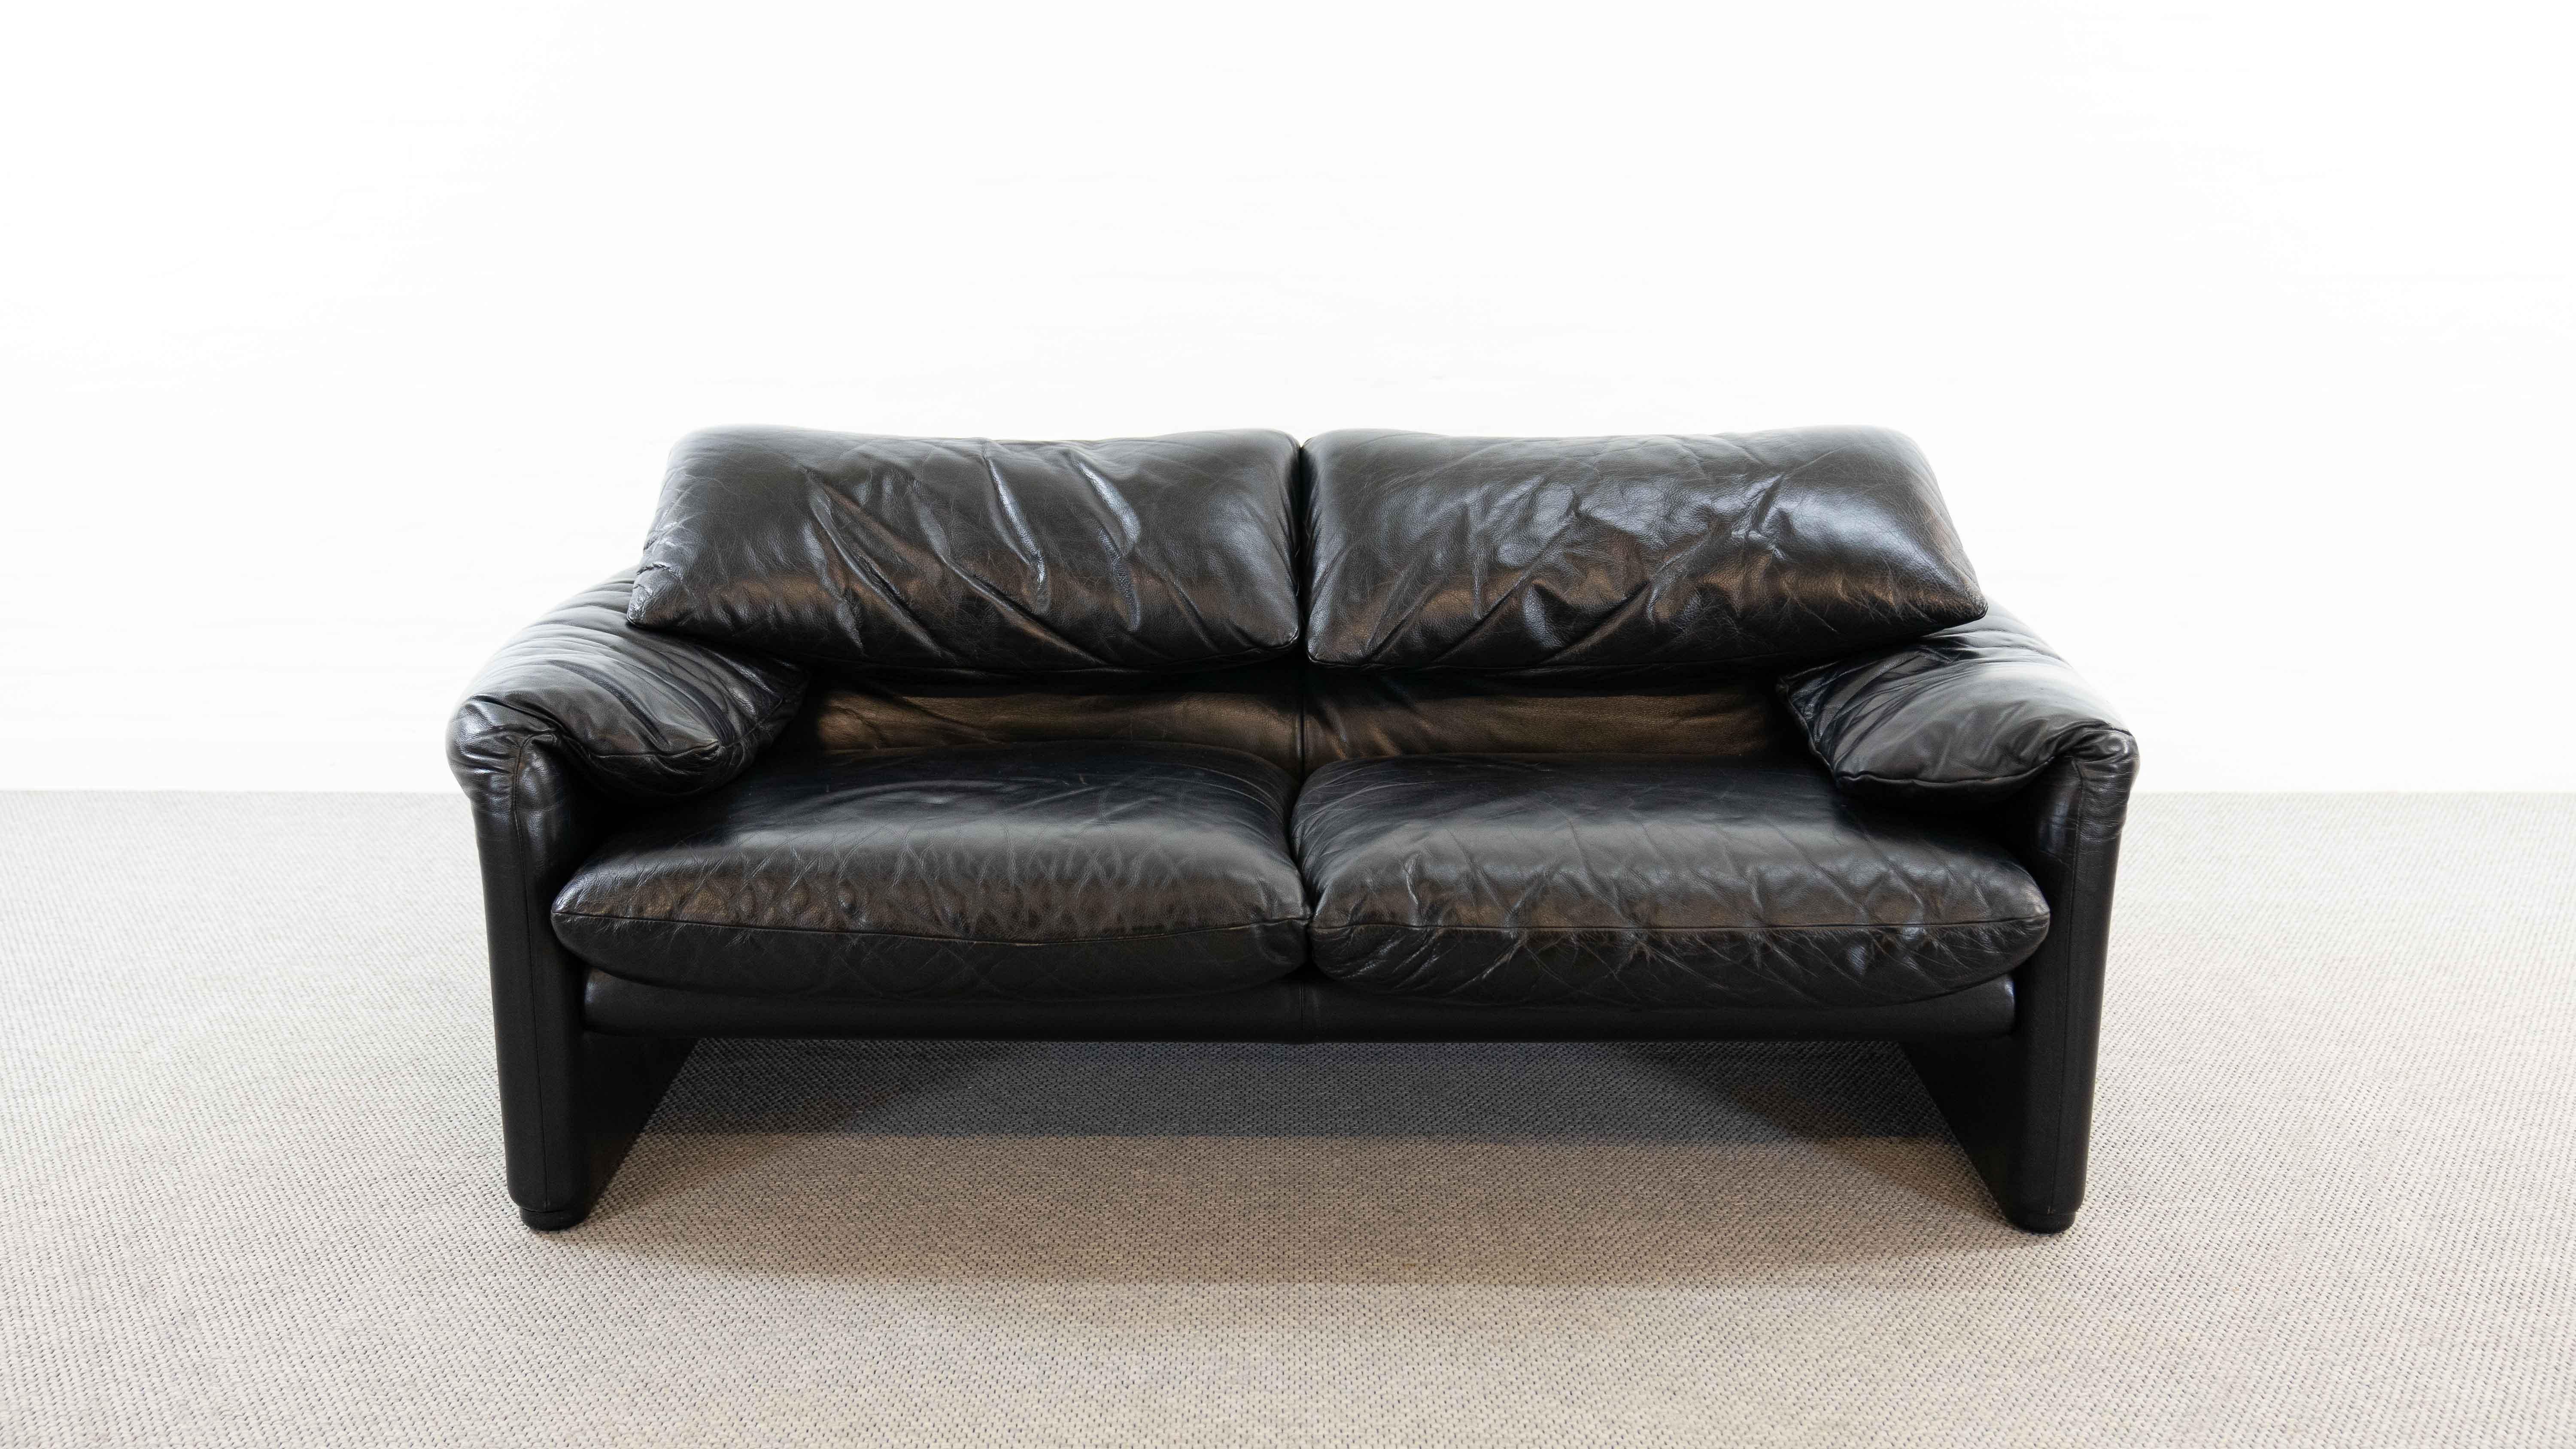 Maralunga 2-seater sofa by Vico Magistretti for Cassina, designed in 1973. Original upholstery in black leather. This sofa features folding back cushions that can be folded down, or folded up to provide the user with more upper back and neck